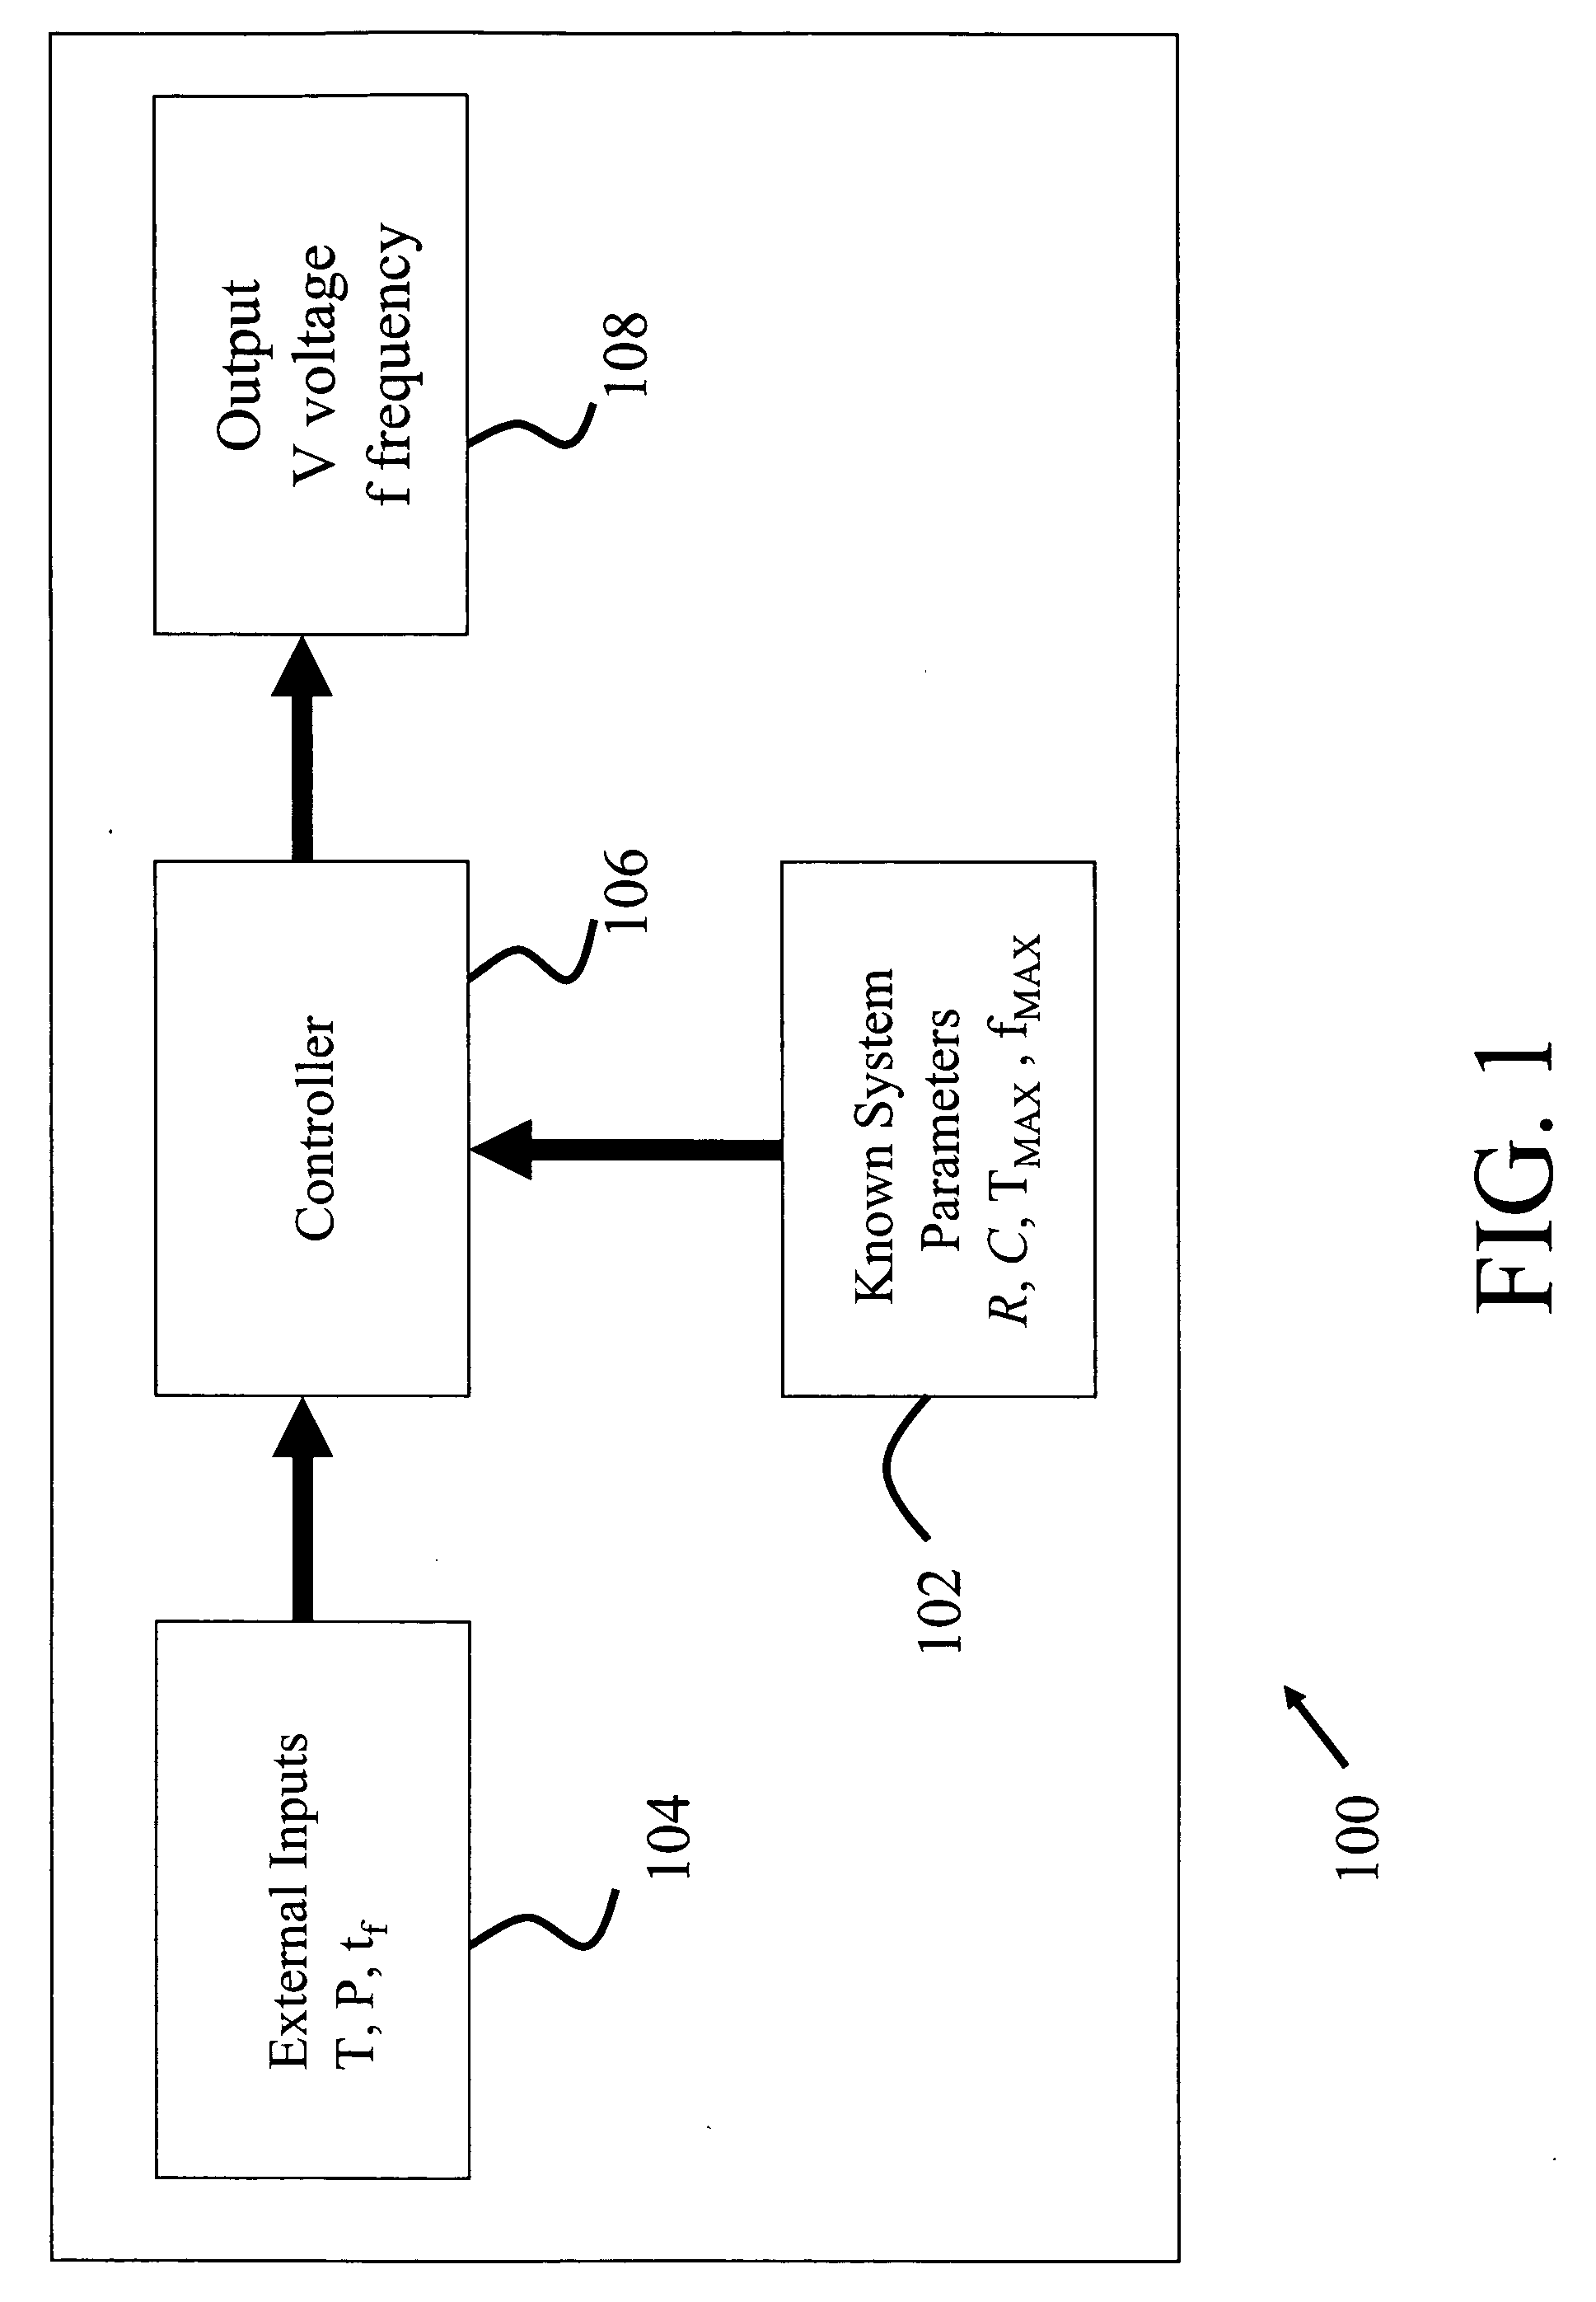 Methods and apparatus for optimal voltage and frequency control of thermally limited systems